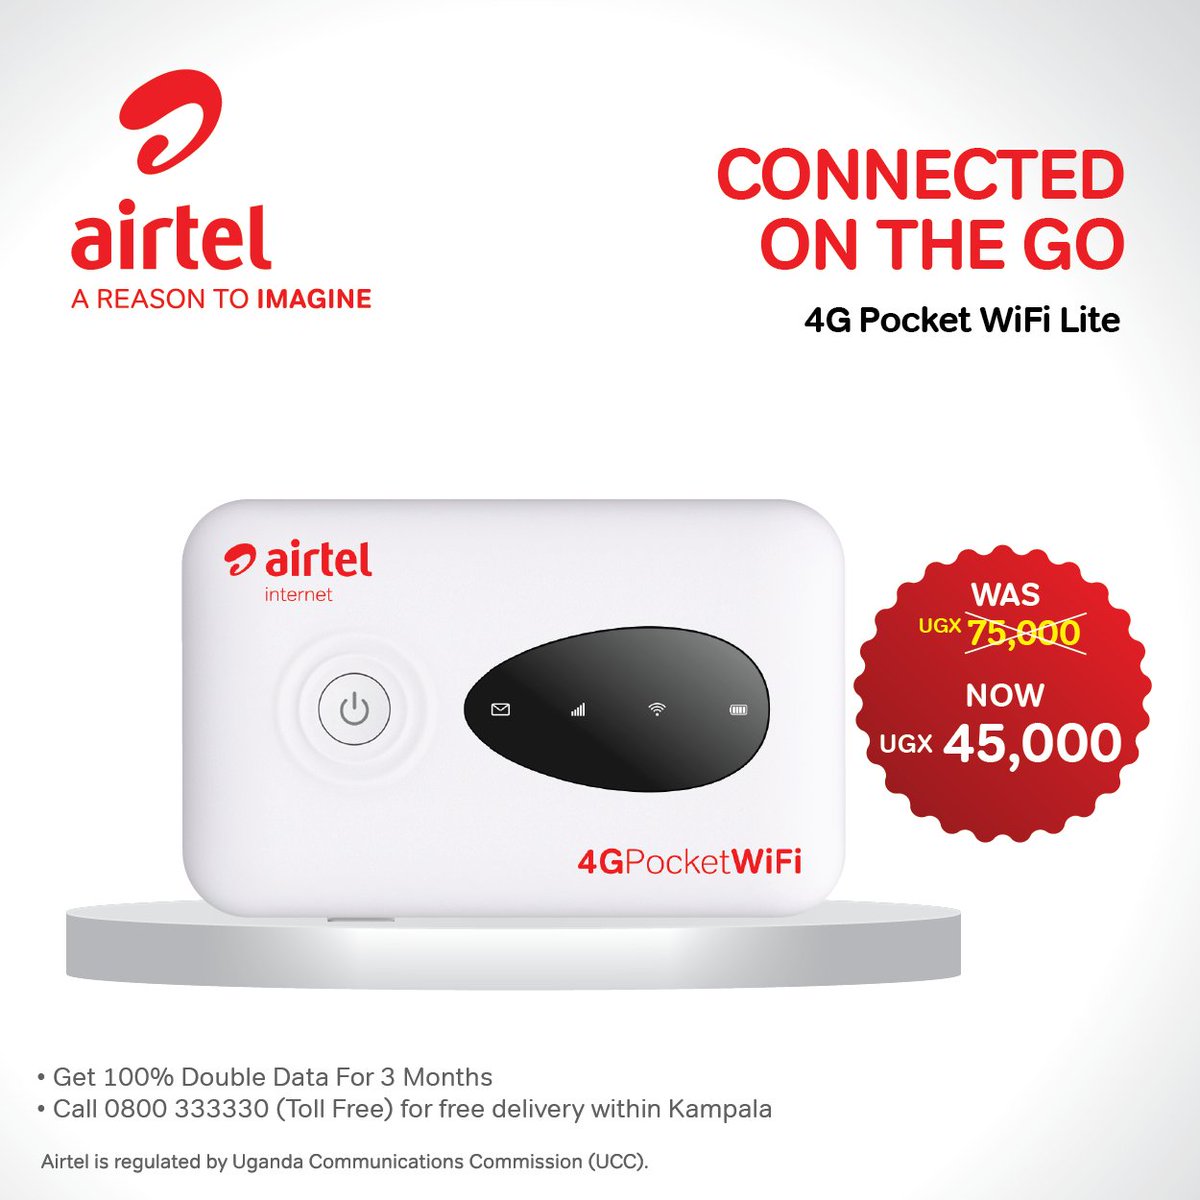 Working from home? Get a #4GPocketWiFiLit for only 45k today, and we'll deliver it to you! Alternatively, visit any Airtel shop near you to pick one up. Call 0800333330 for delivery within Kampala